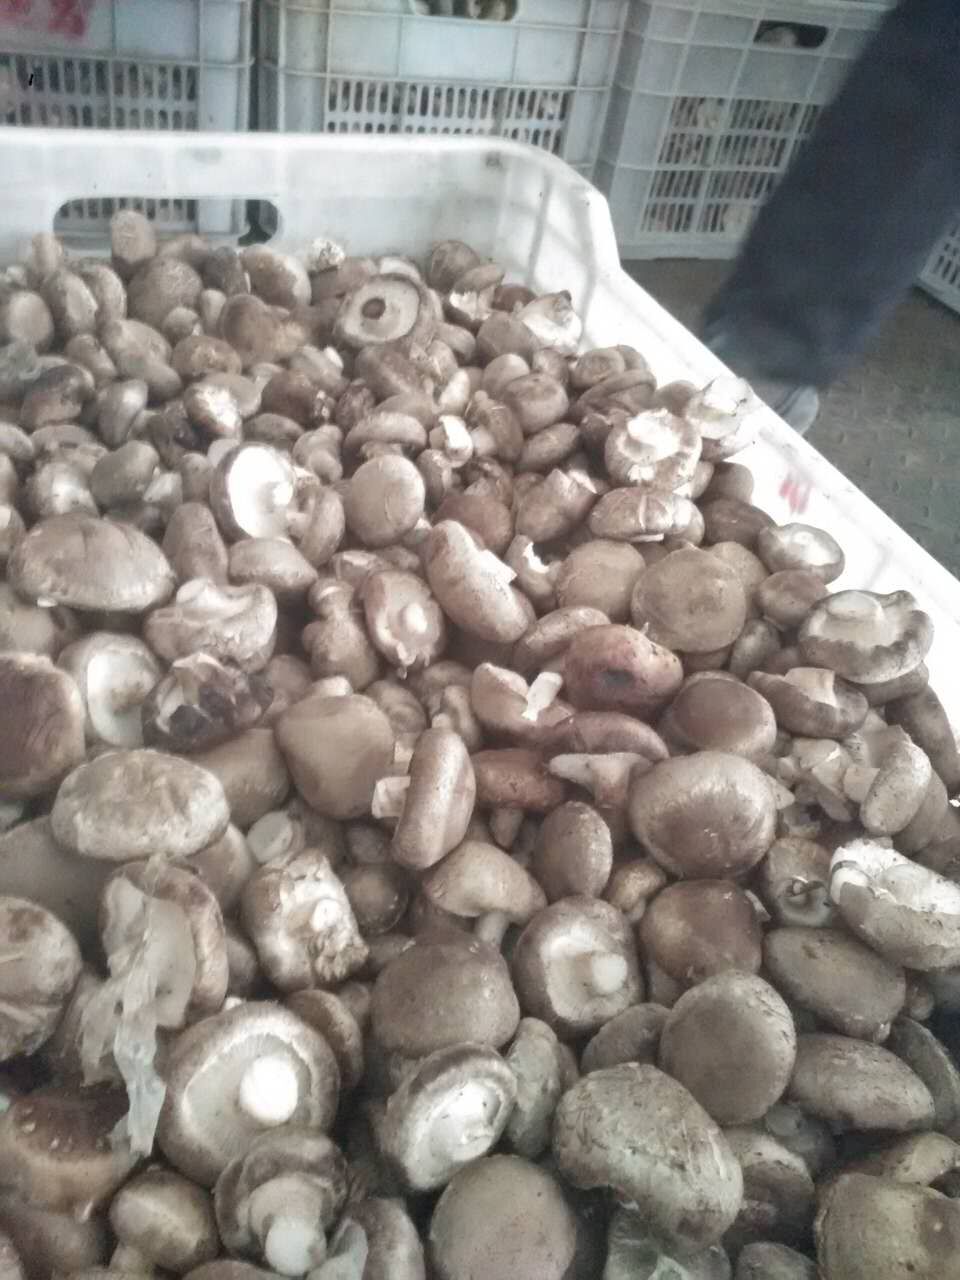 Raw material of the canned shiitake